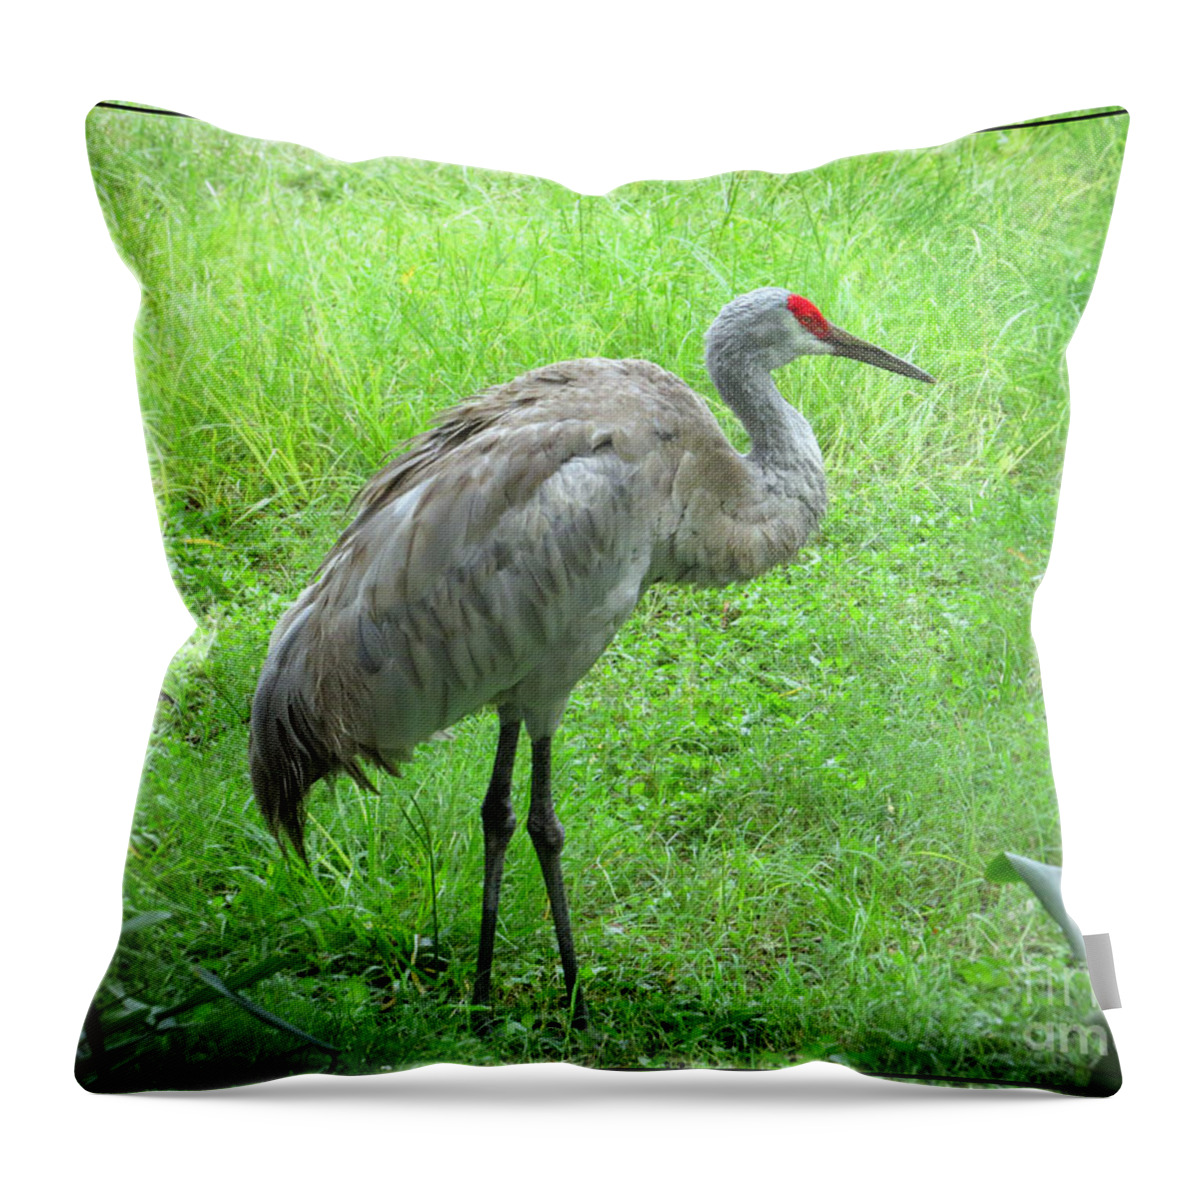 Sandhill Crane Throw Pillow featuring the photograph Sandhill Crane - Bird Photography by Ella Kaye Dickey